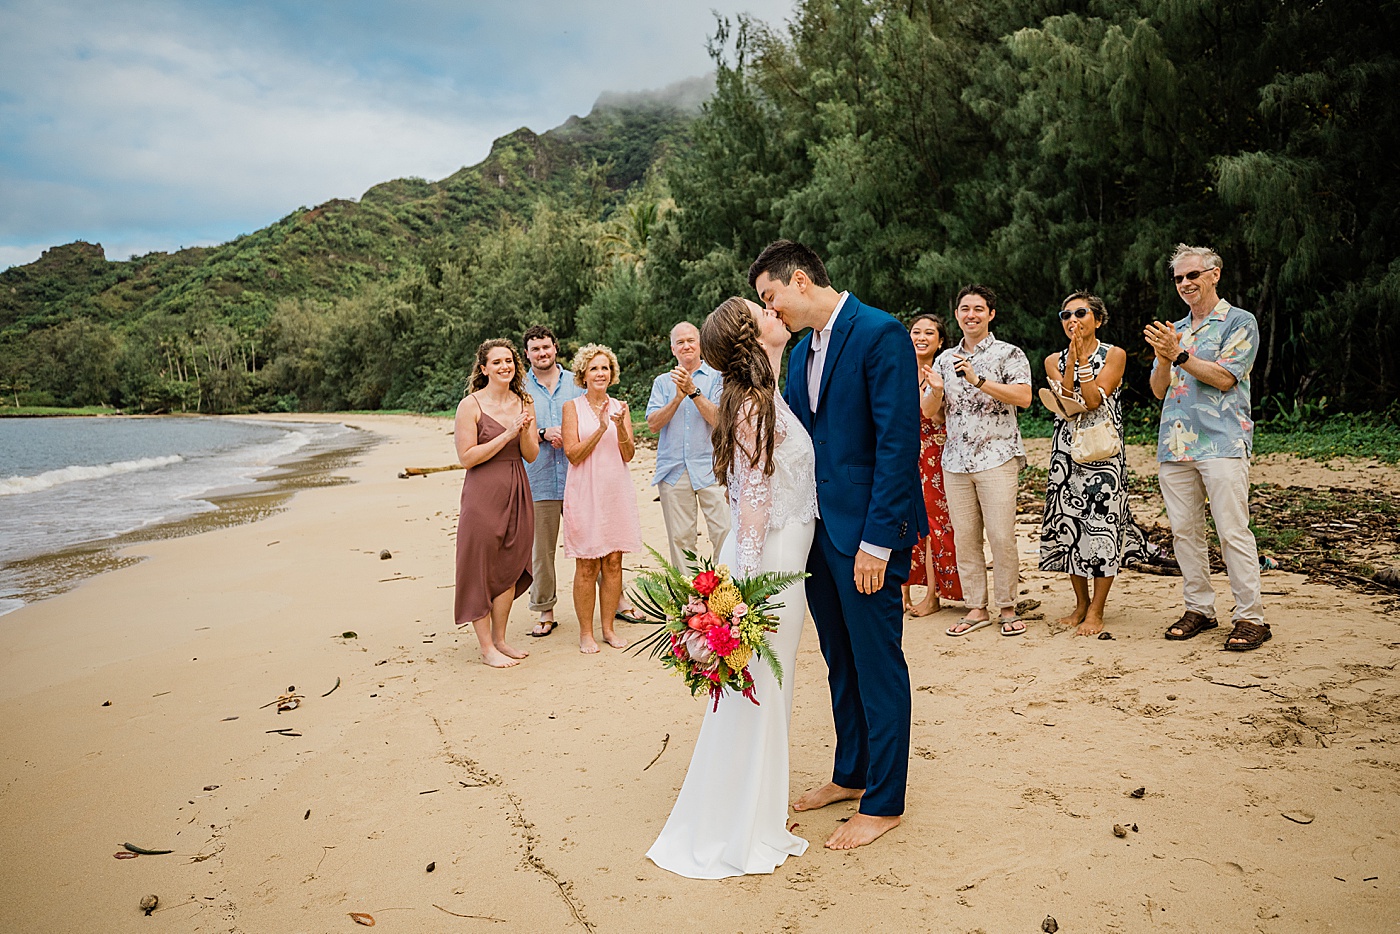 Adventurous Oahu elopement at the beach. Bride and groom kissing with family celebrating